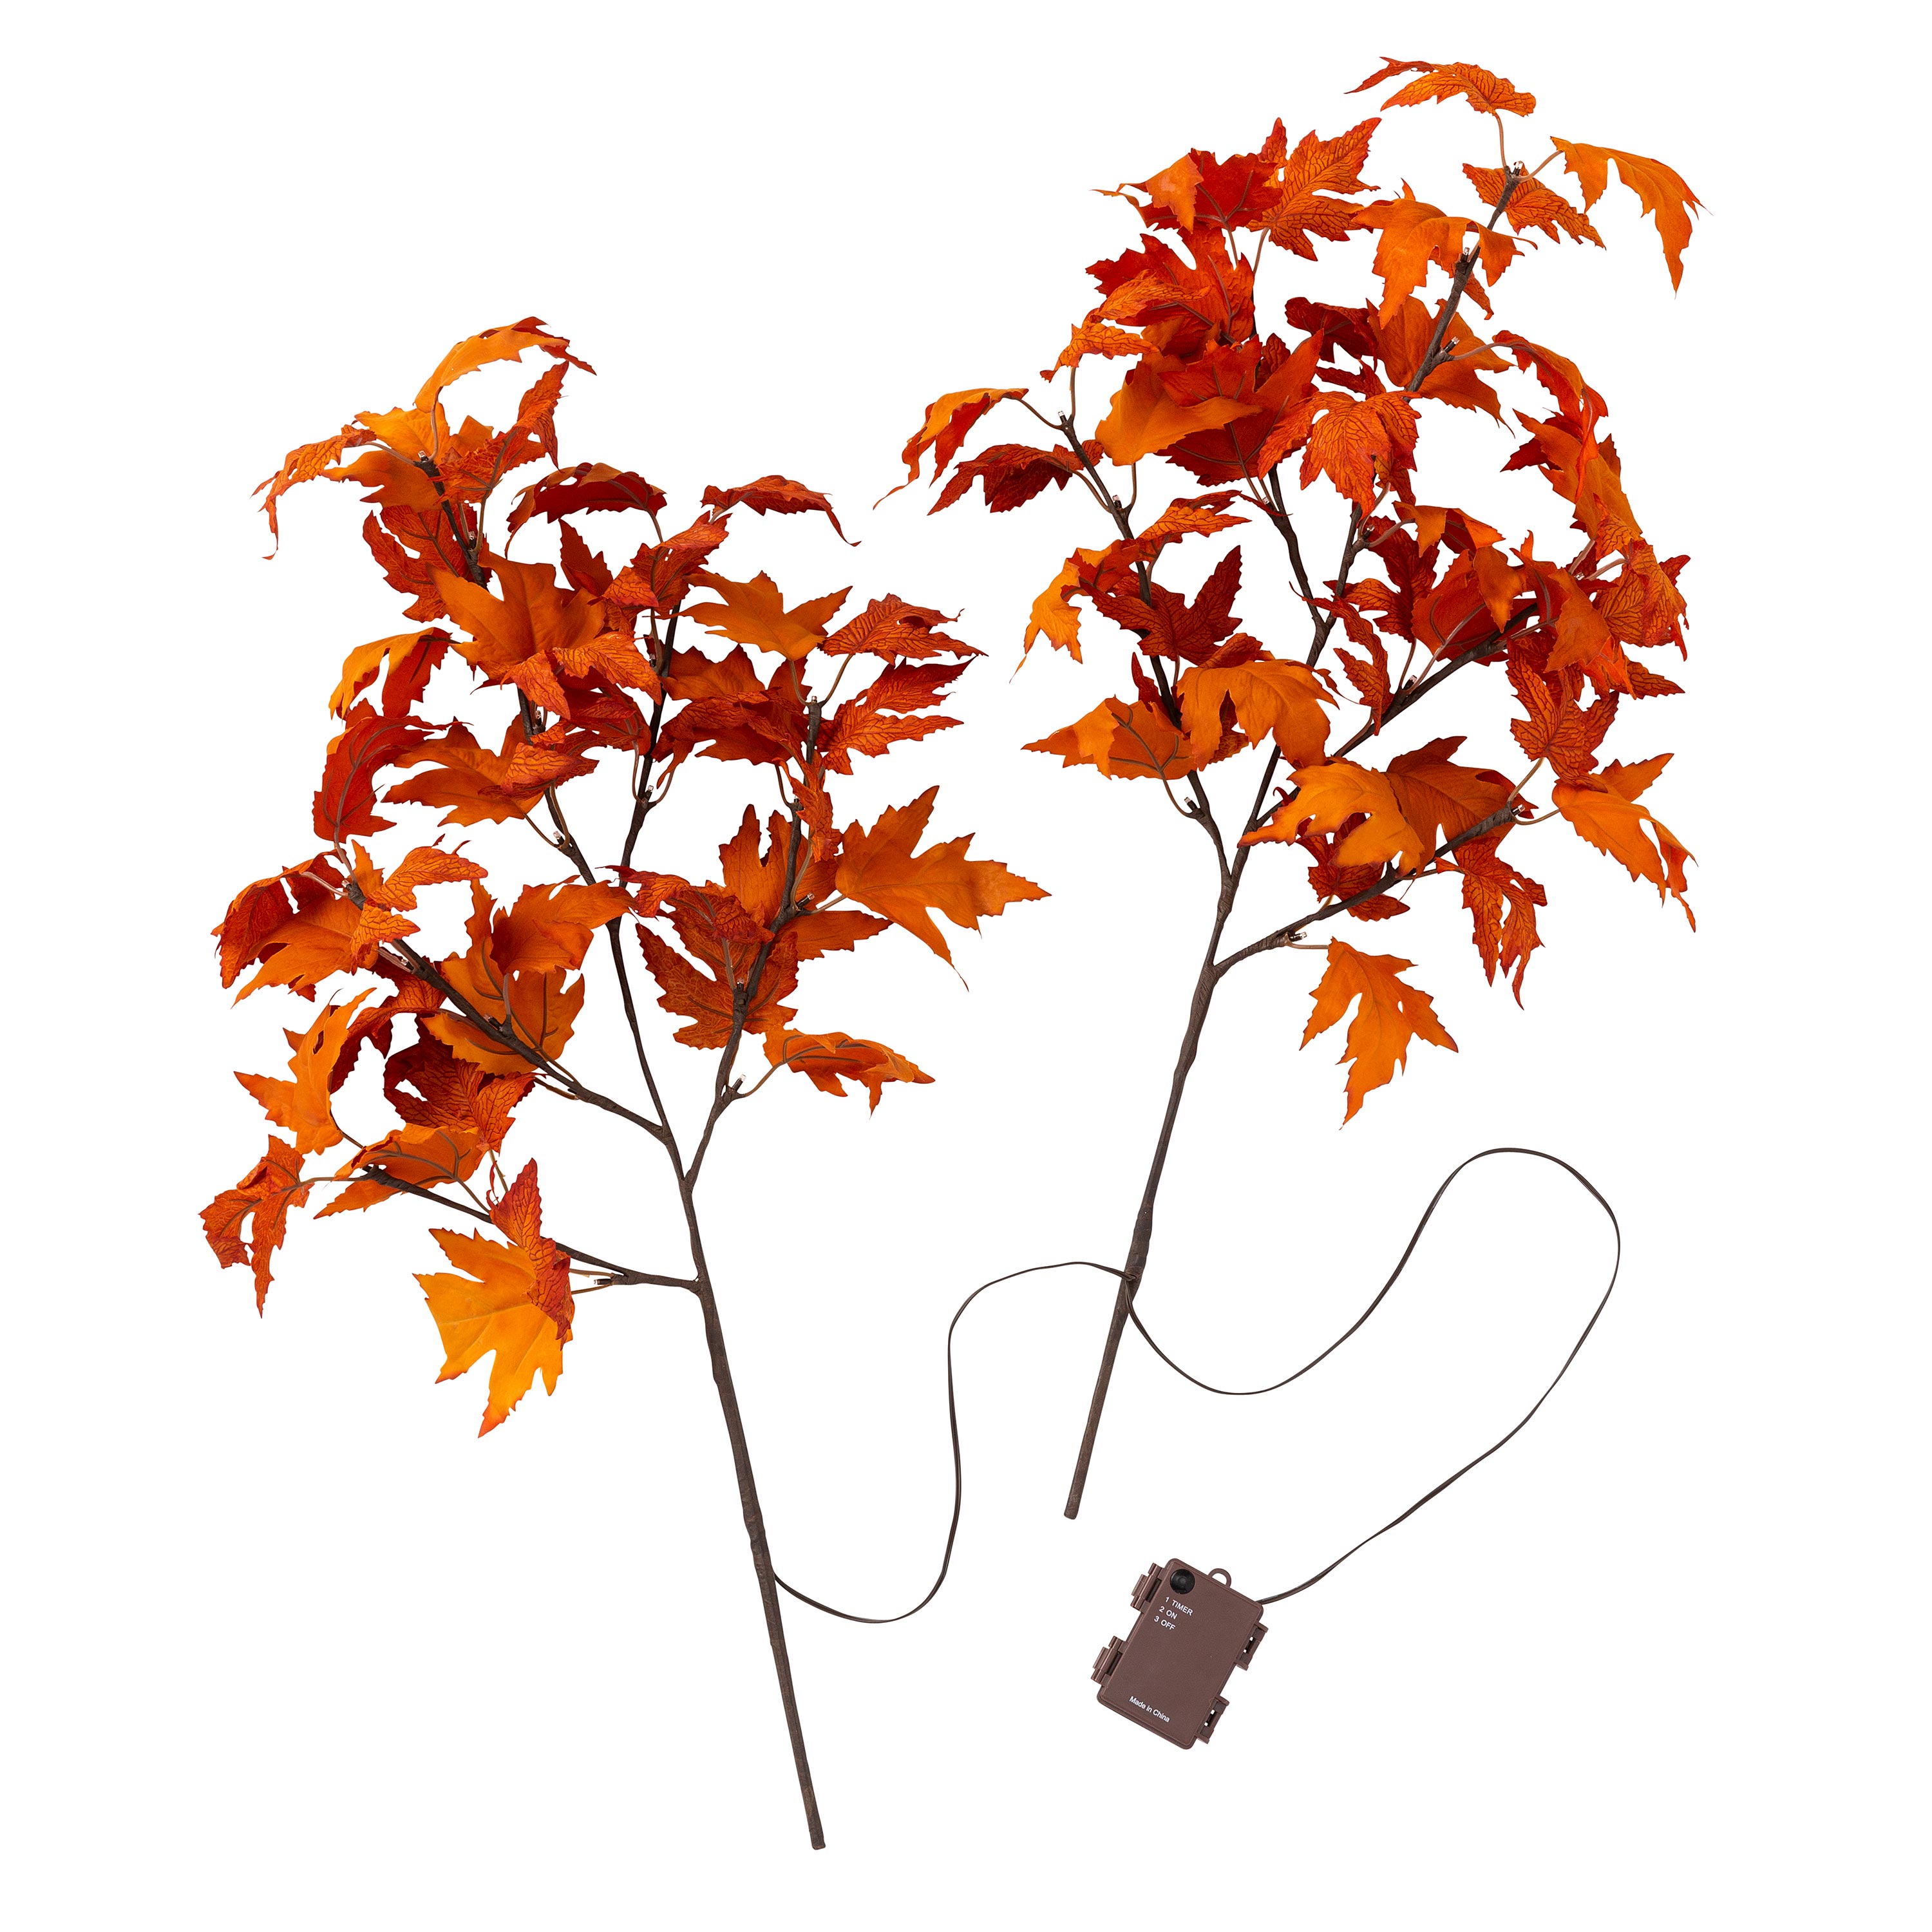 Indoor/Outdoor Lighted Maple Tree Branches, Set of 2